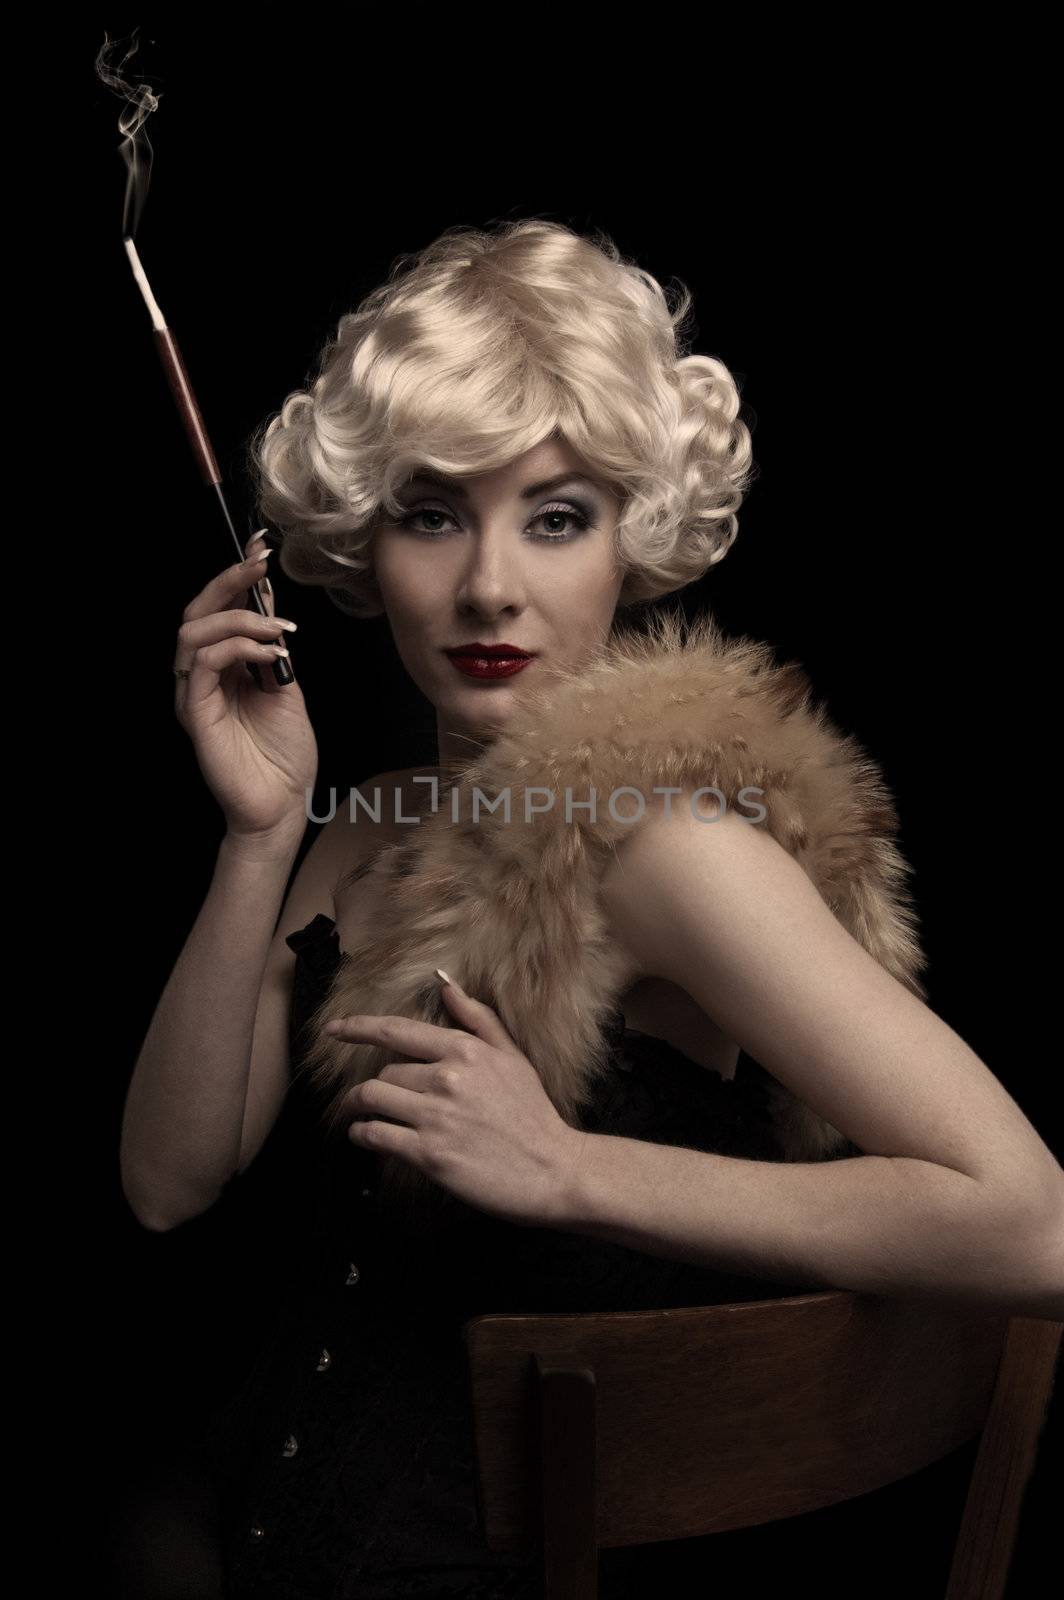 Blond retro-styled woman with cigarette over black